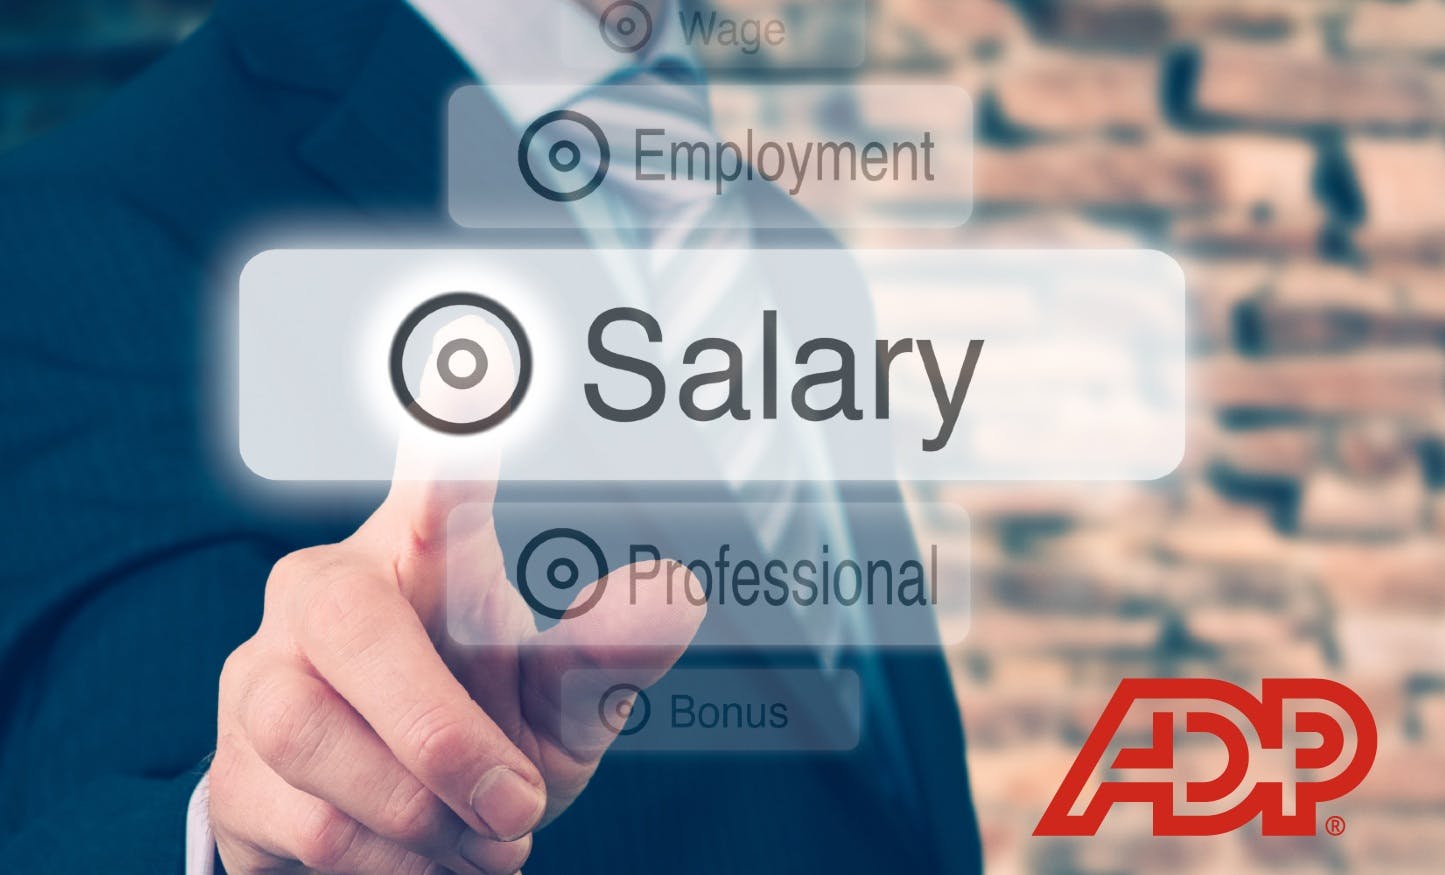 ADP Payroll Services: Features, Prices, and Pros and Cons!